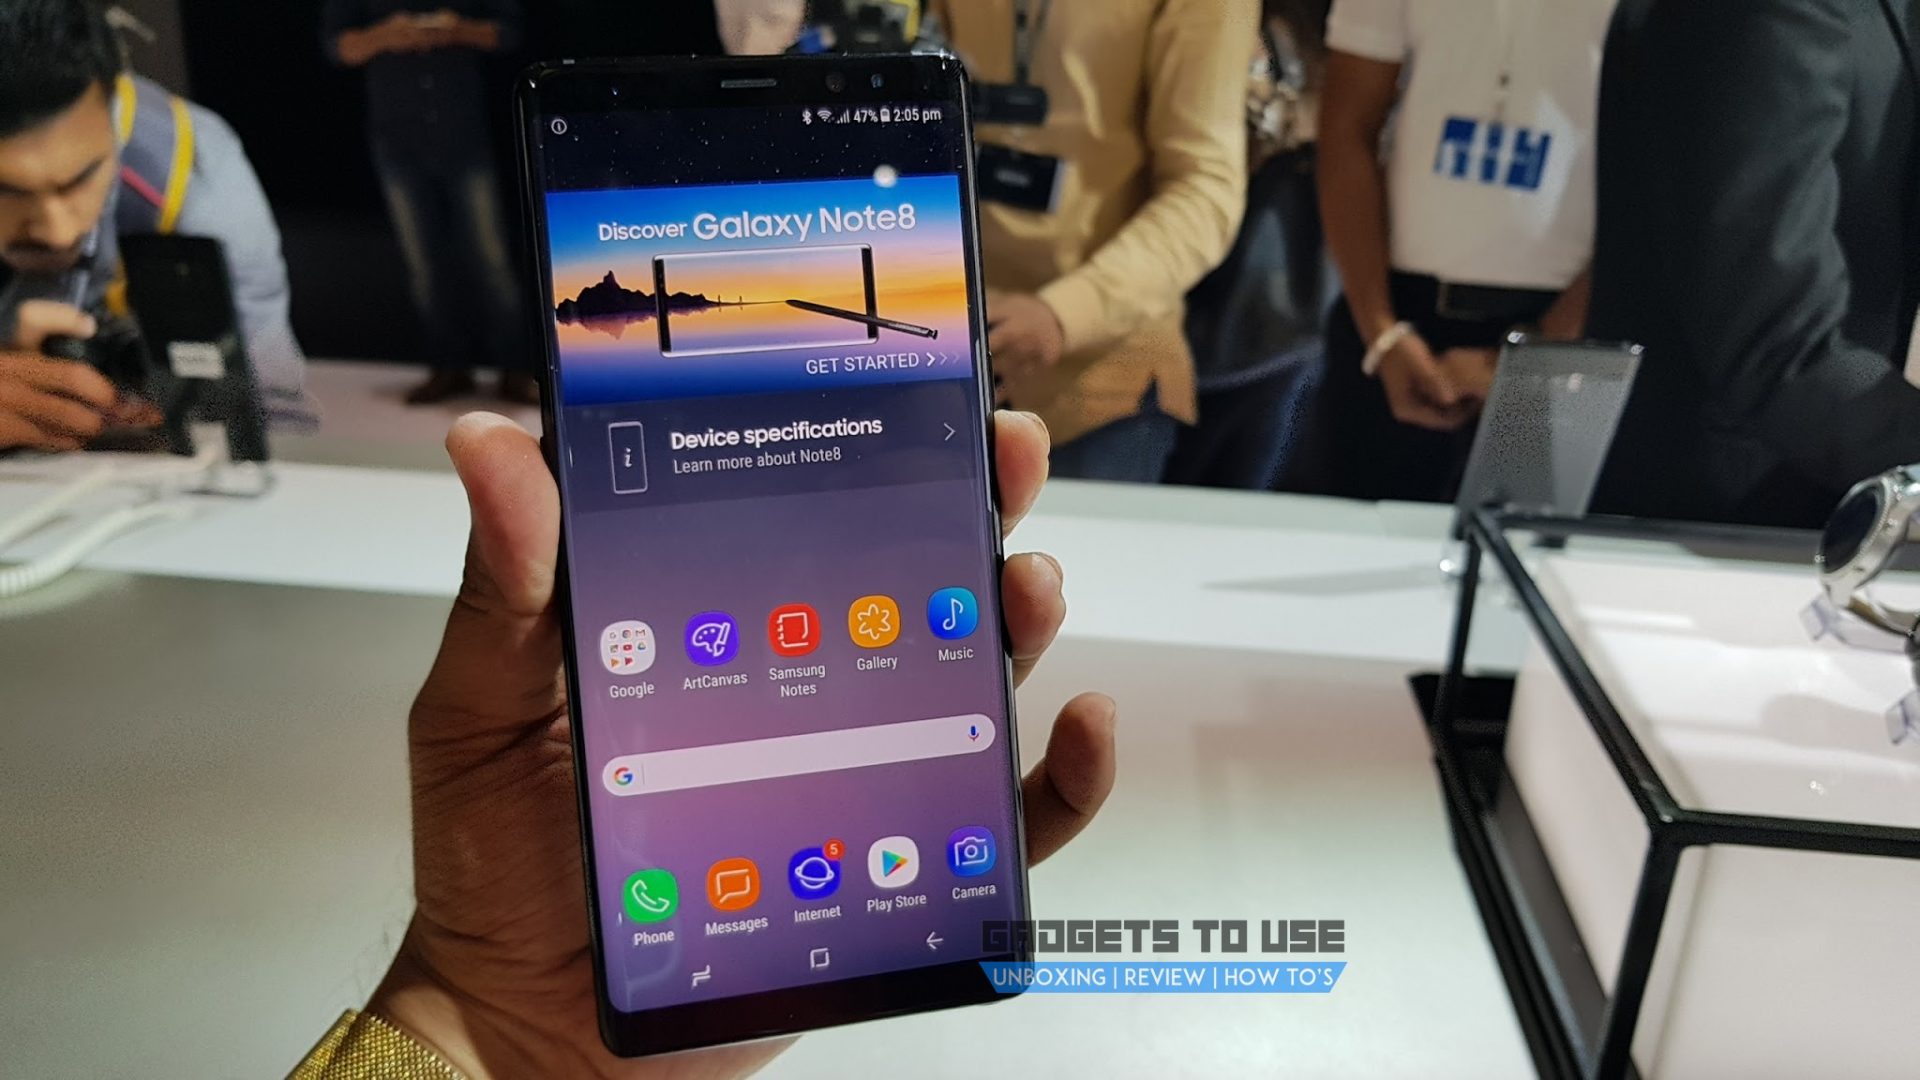 Samsung Galaxy Note 8 featured image e1505211643214